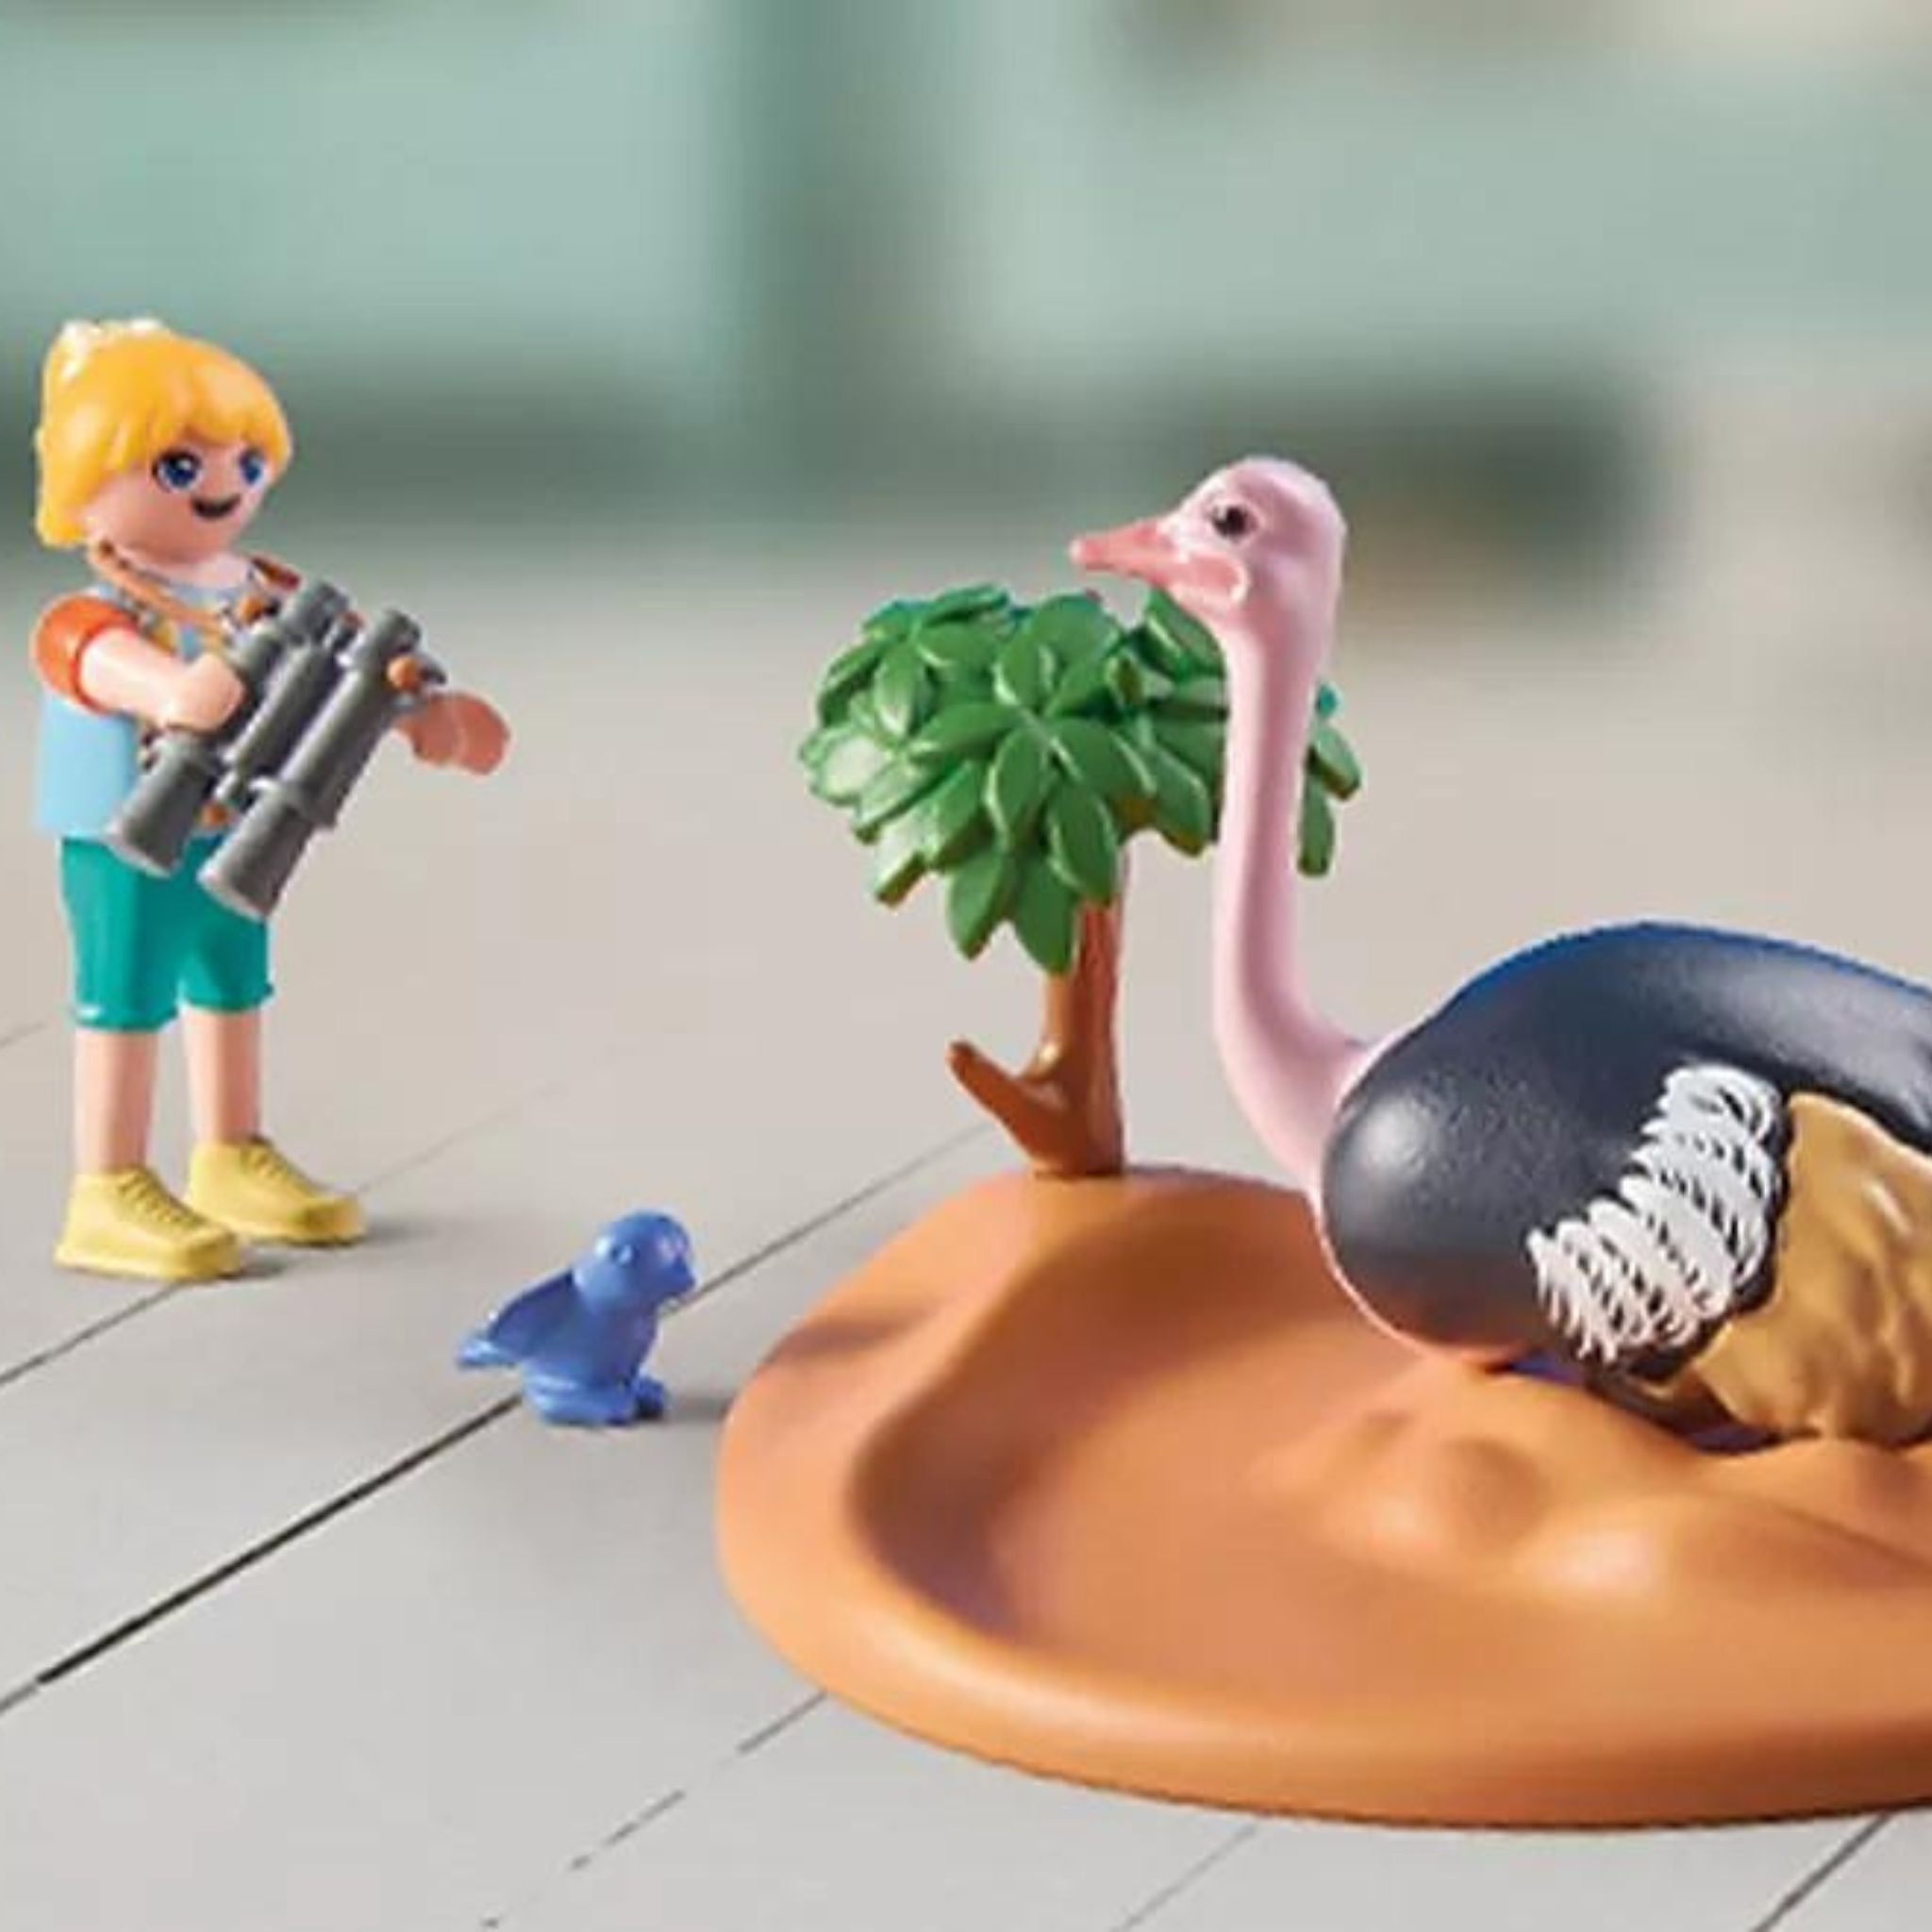 Playmobil Wiltopia - Ostrich Keepers – Scooter Girl Toys